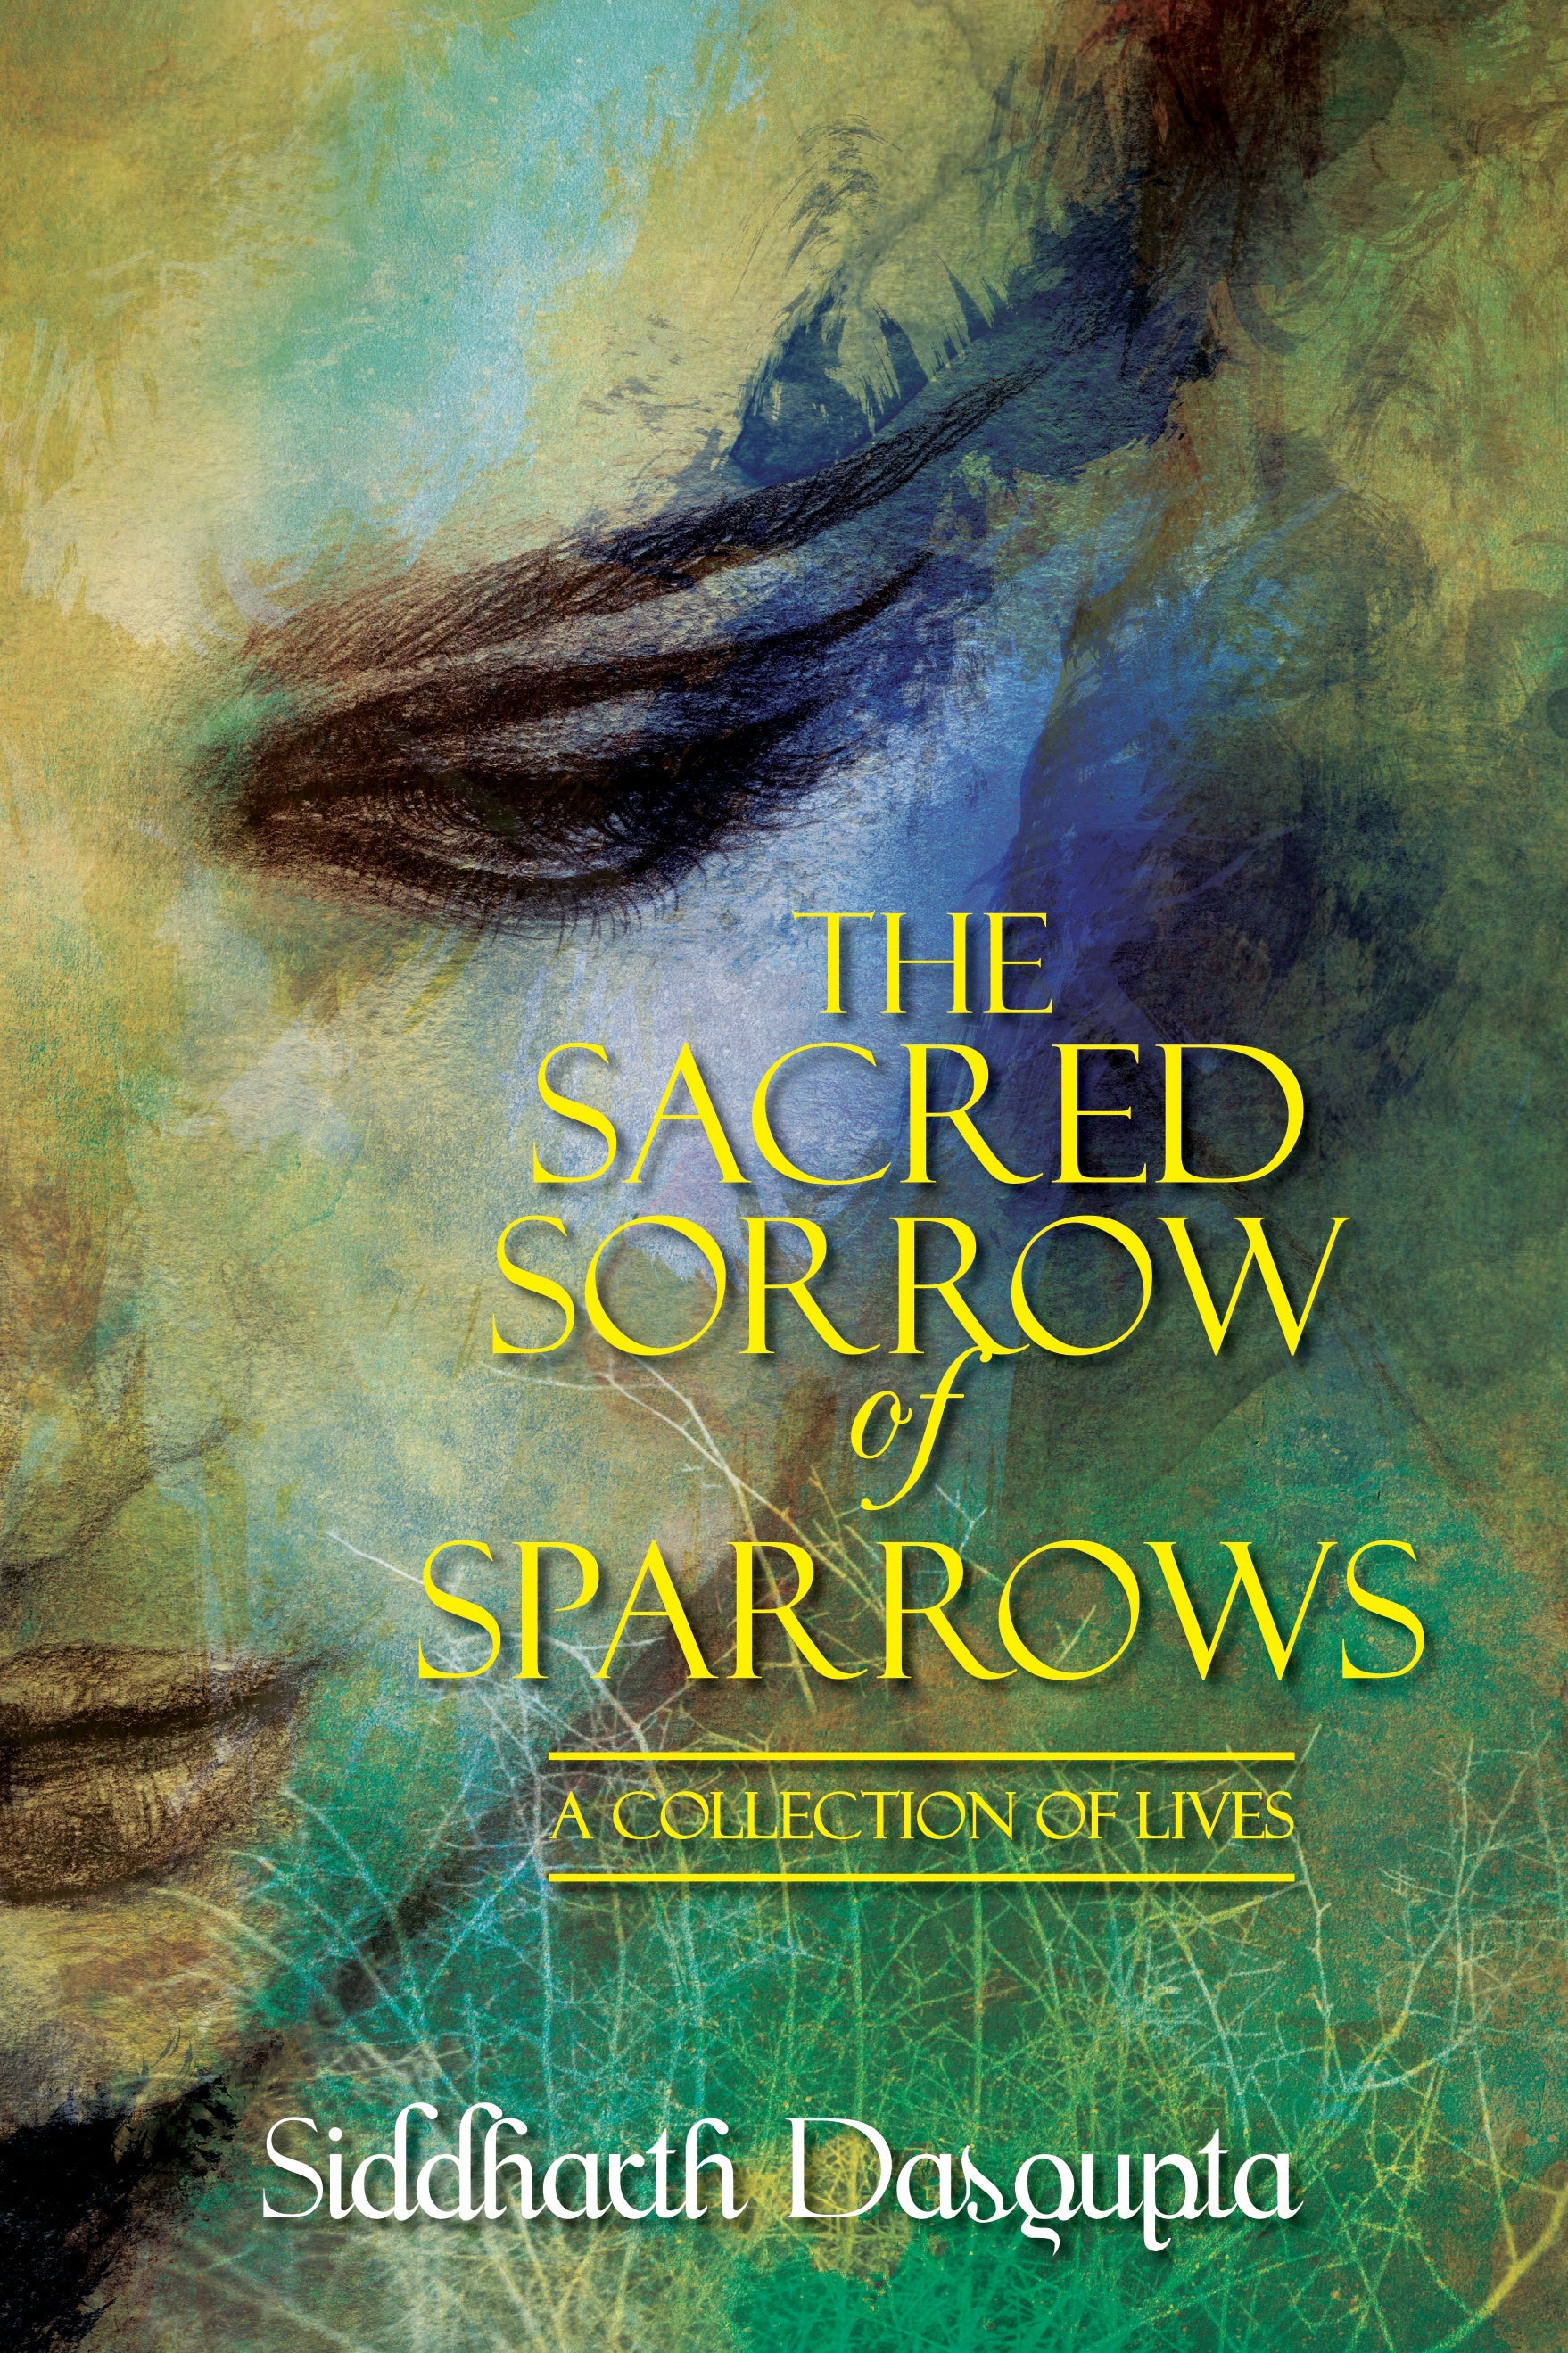 The Sacred Sorrow of Sparrows: A Collection of Lives